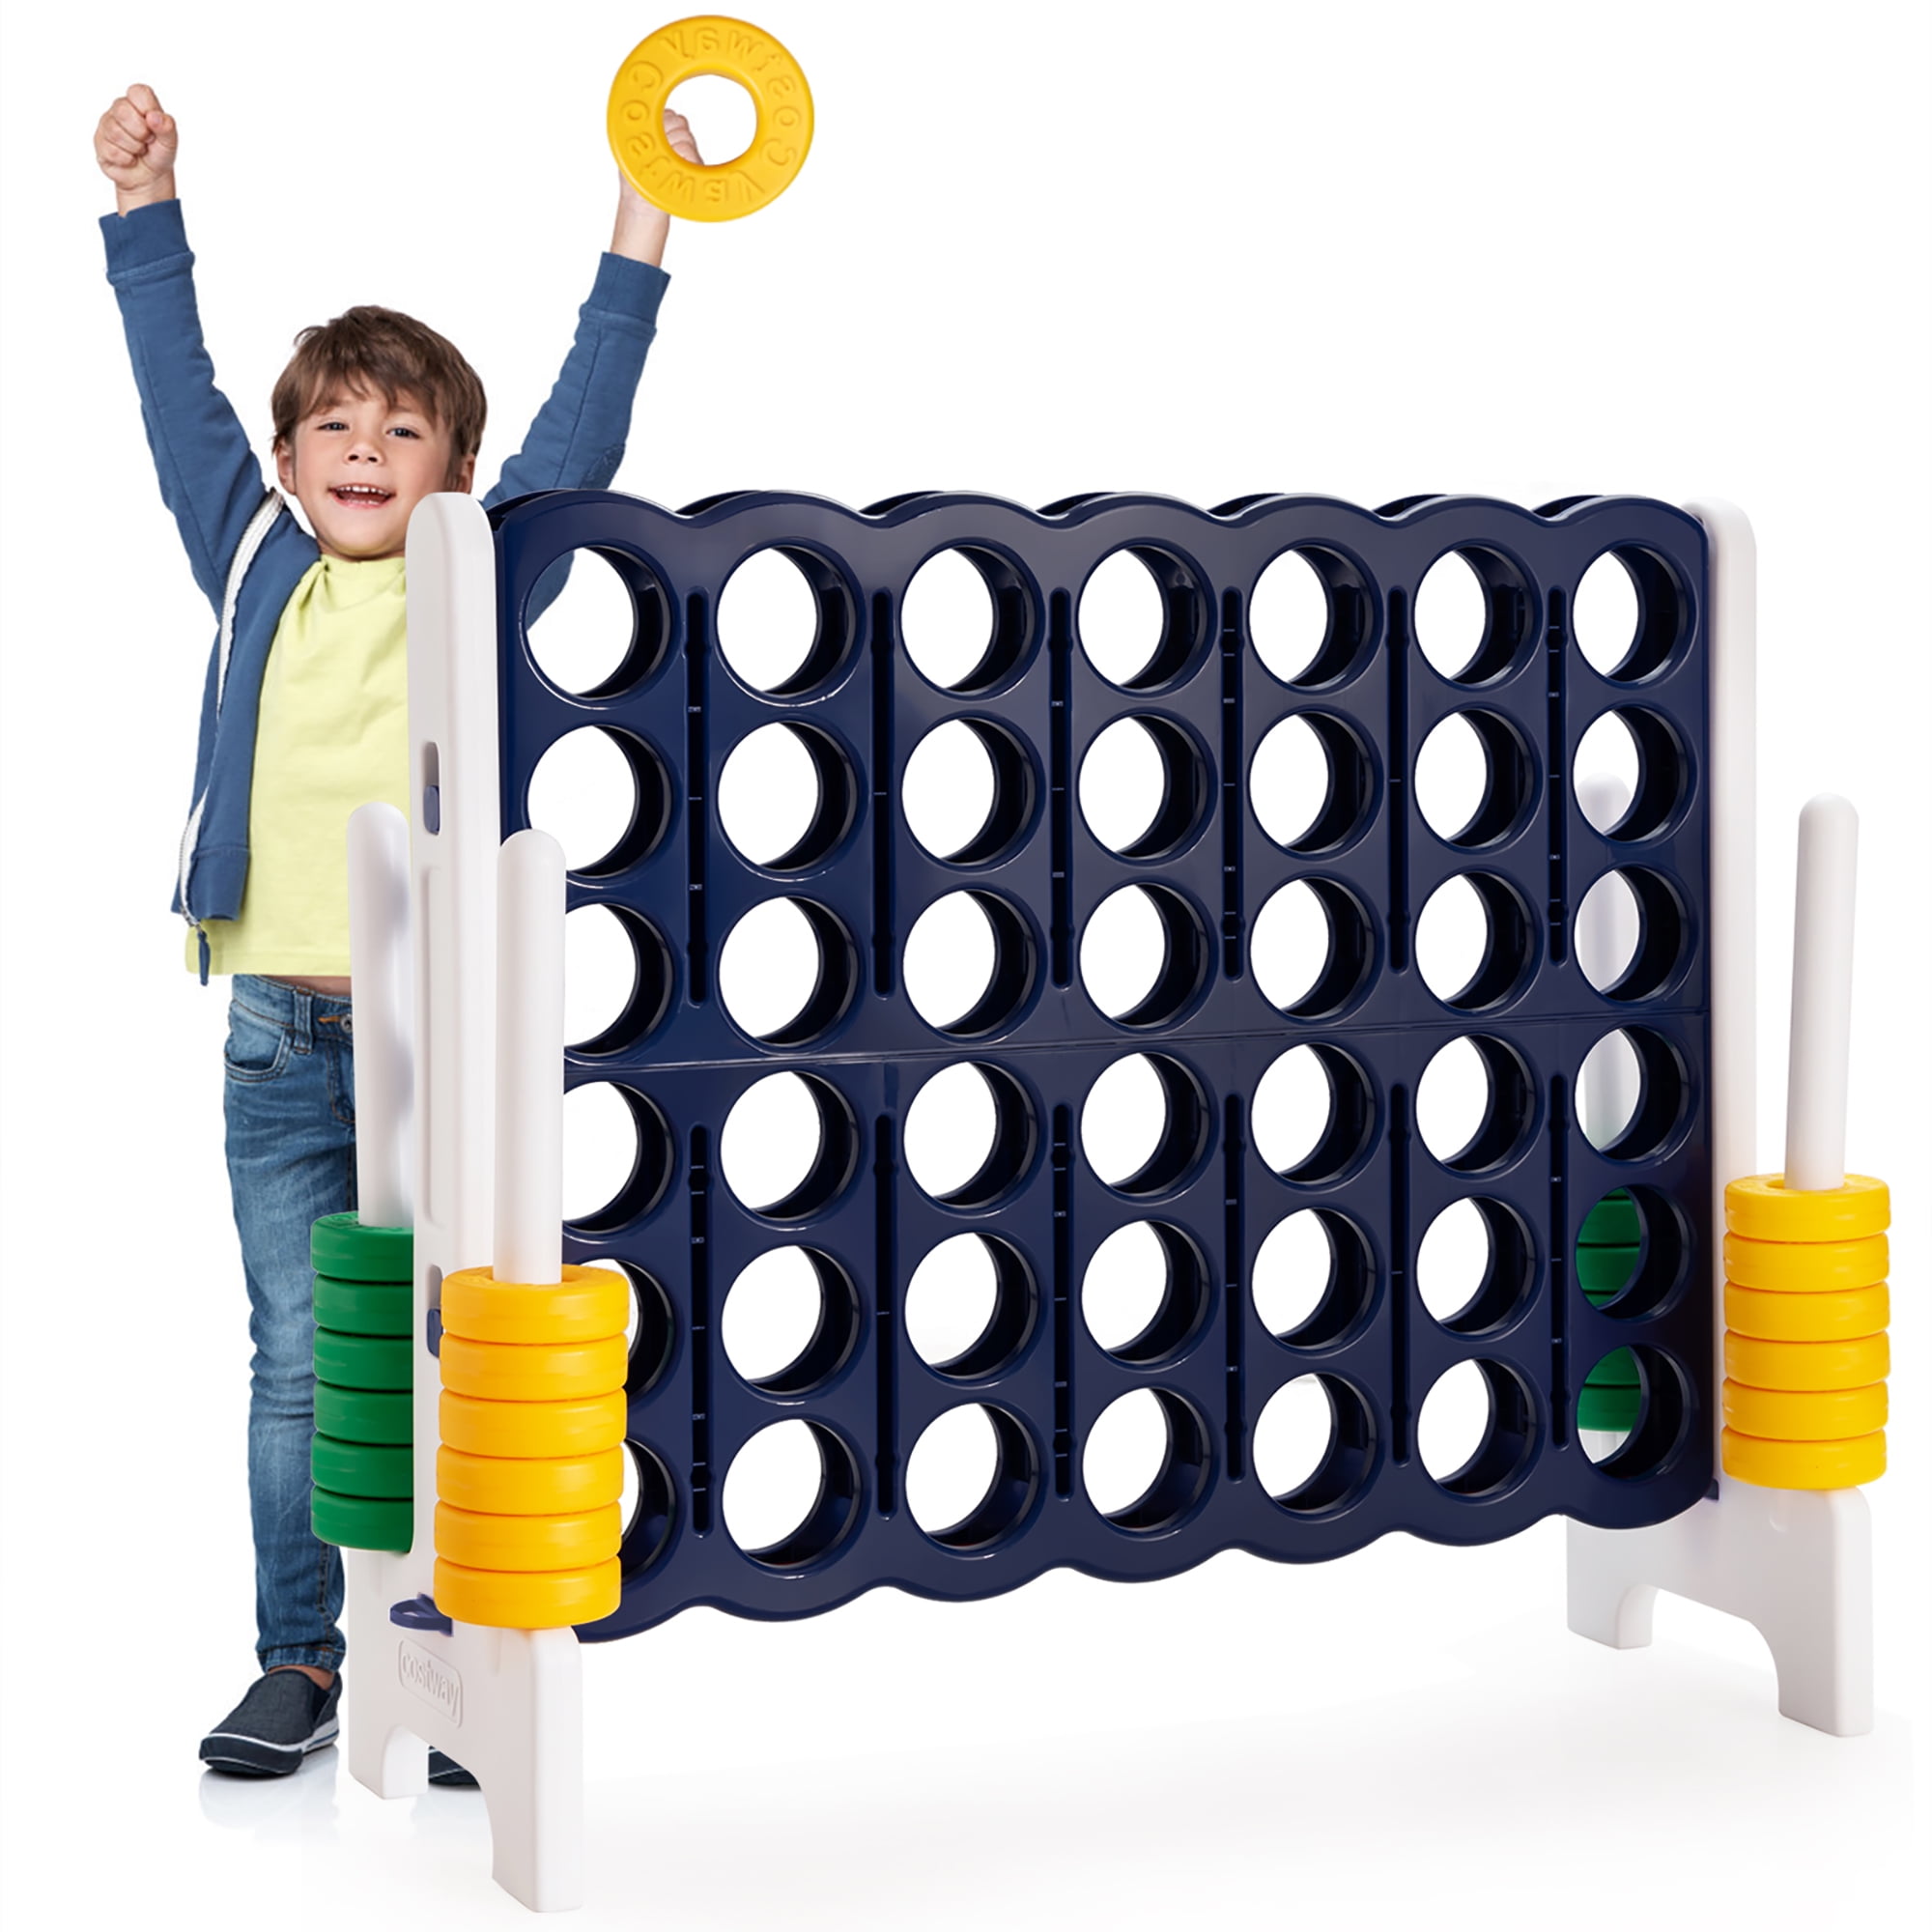 Giant Connect Four 4 in A Row Garden Outdoor Indoor Game Kids Adult Family Fun 